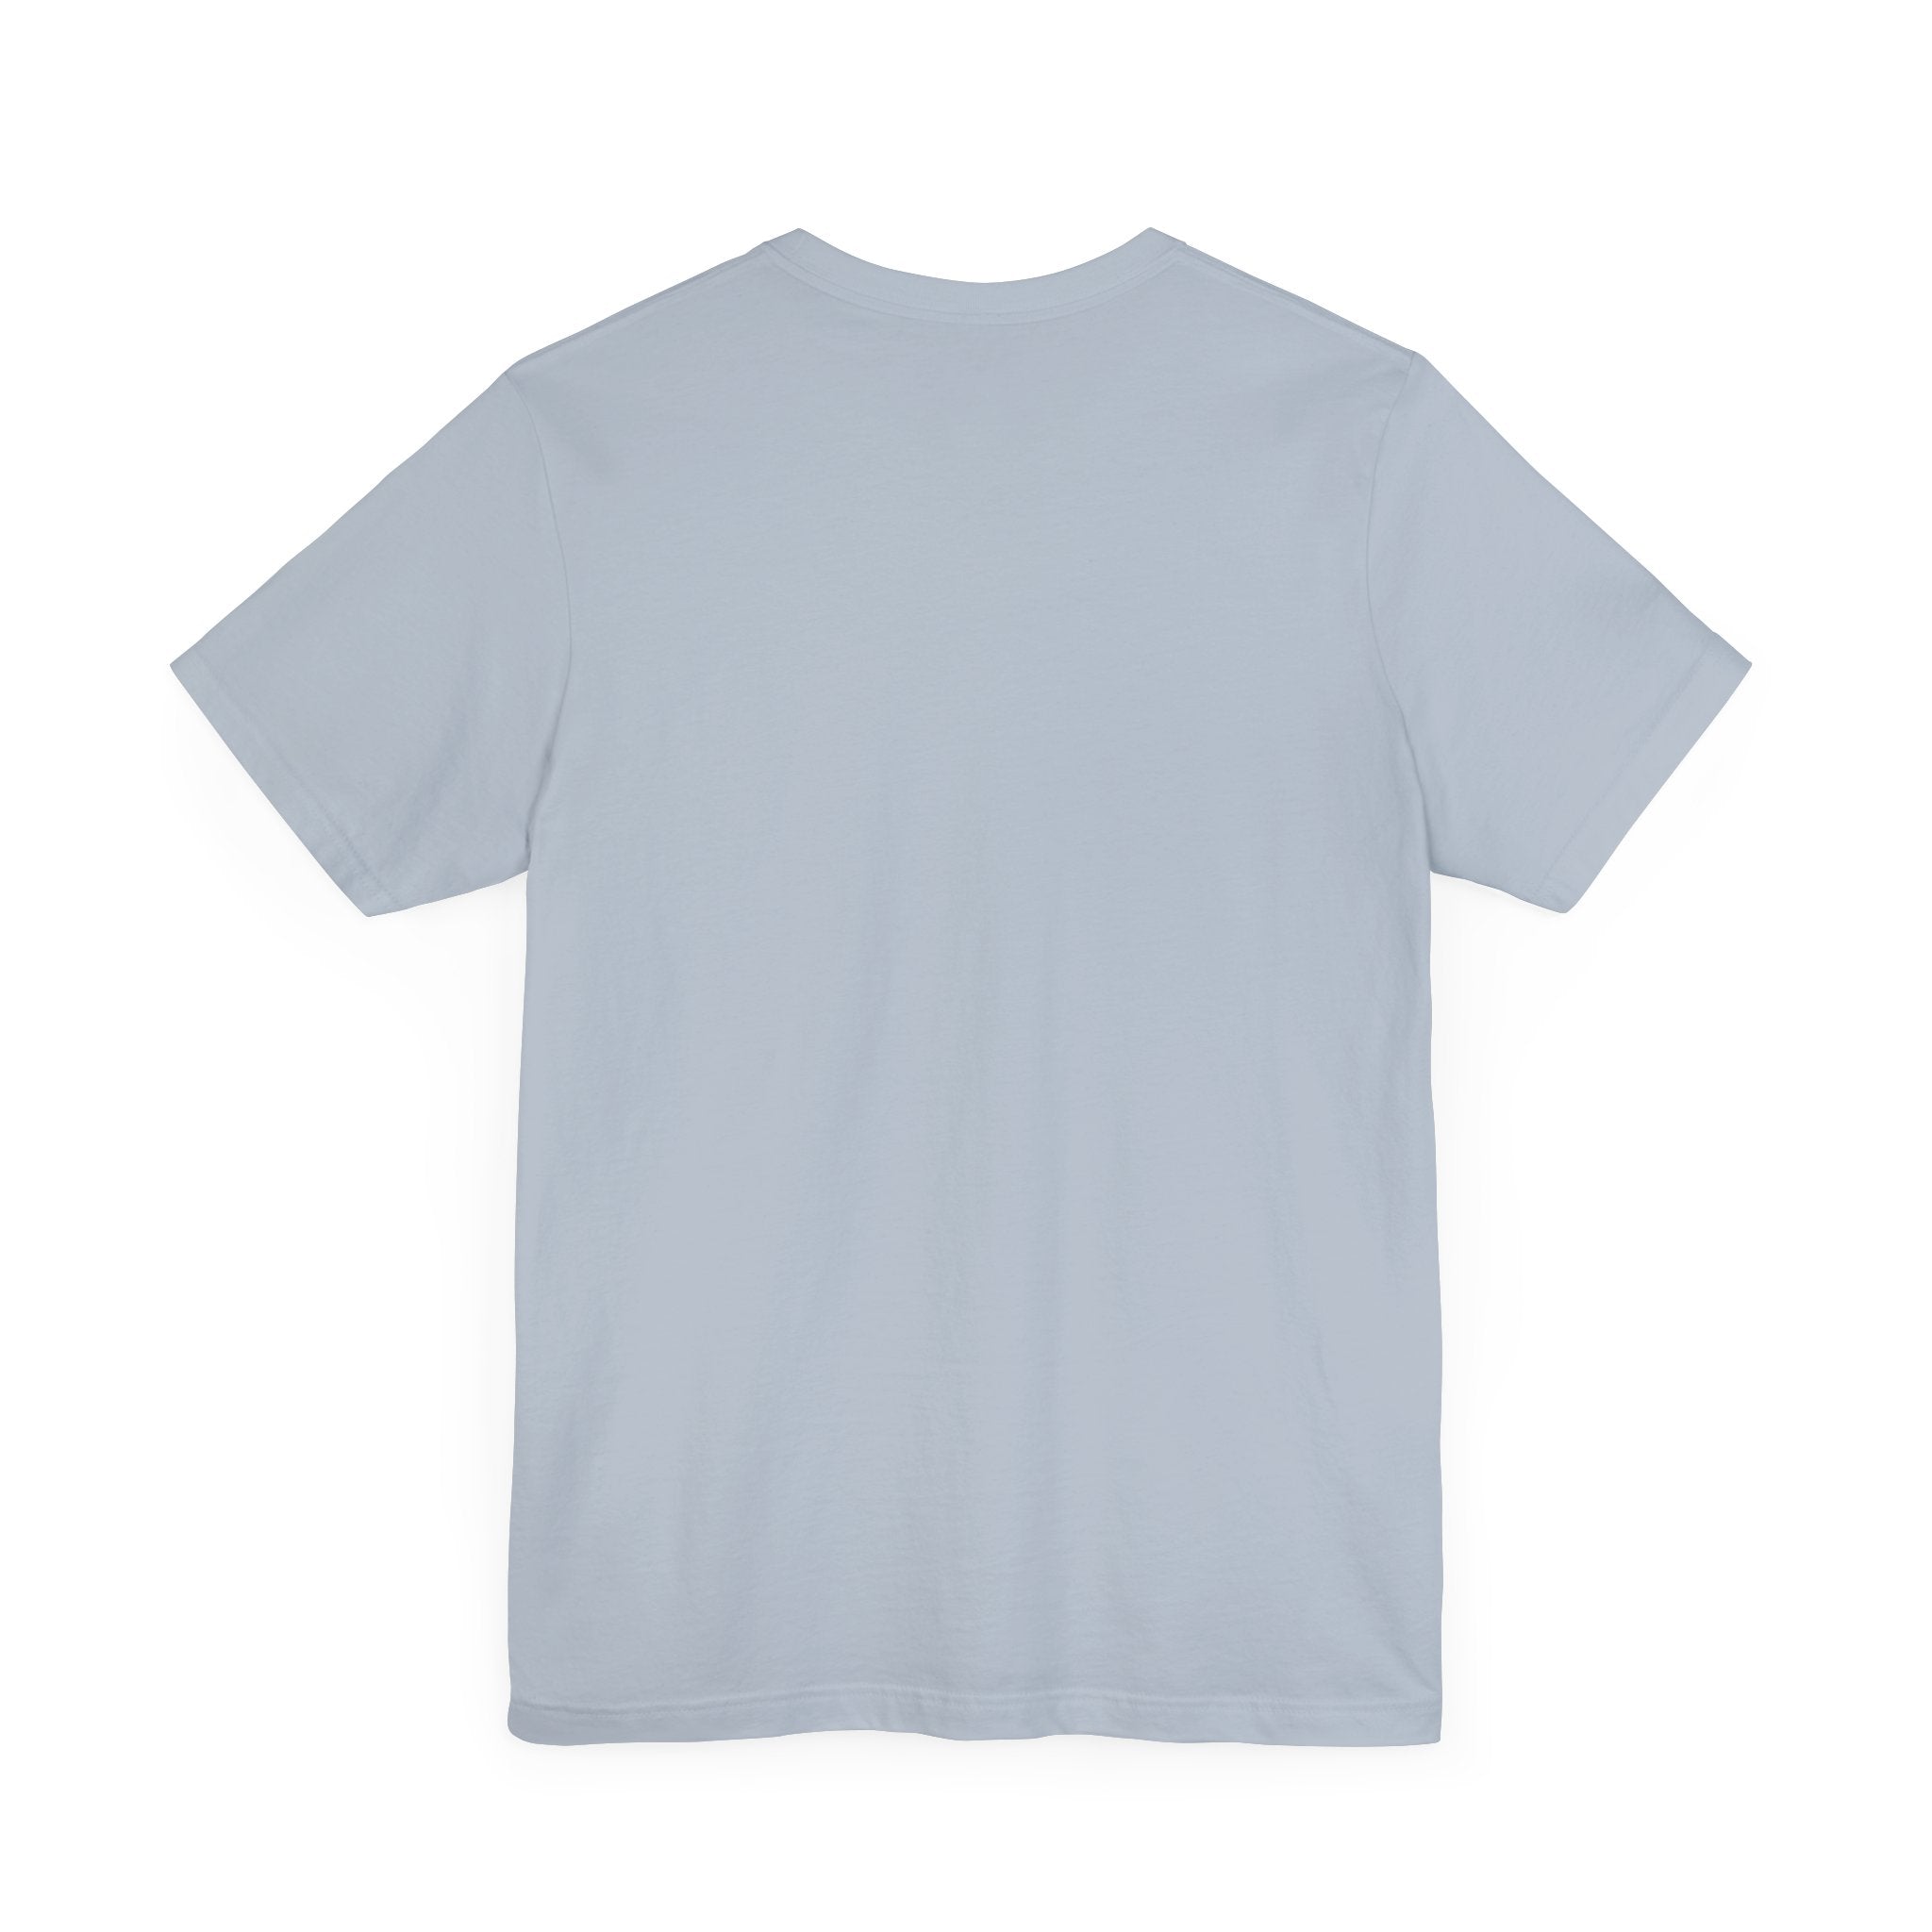 Back view of a plain light gray short-sleeved C-Ho-Co-La-Te - T-Shirt made from 100% Airlume cotton against a white background.